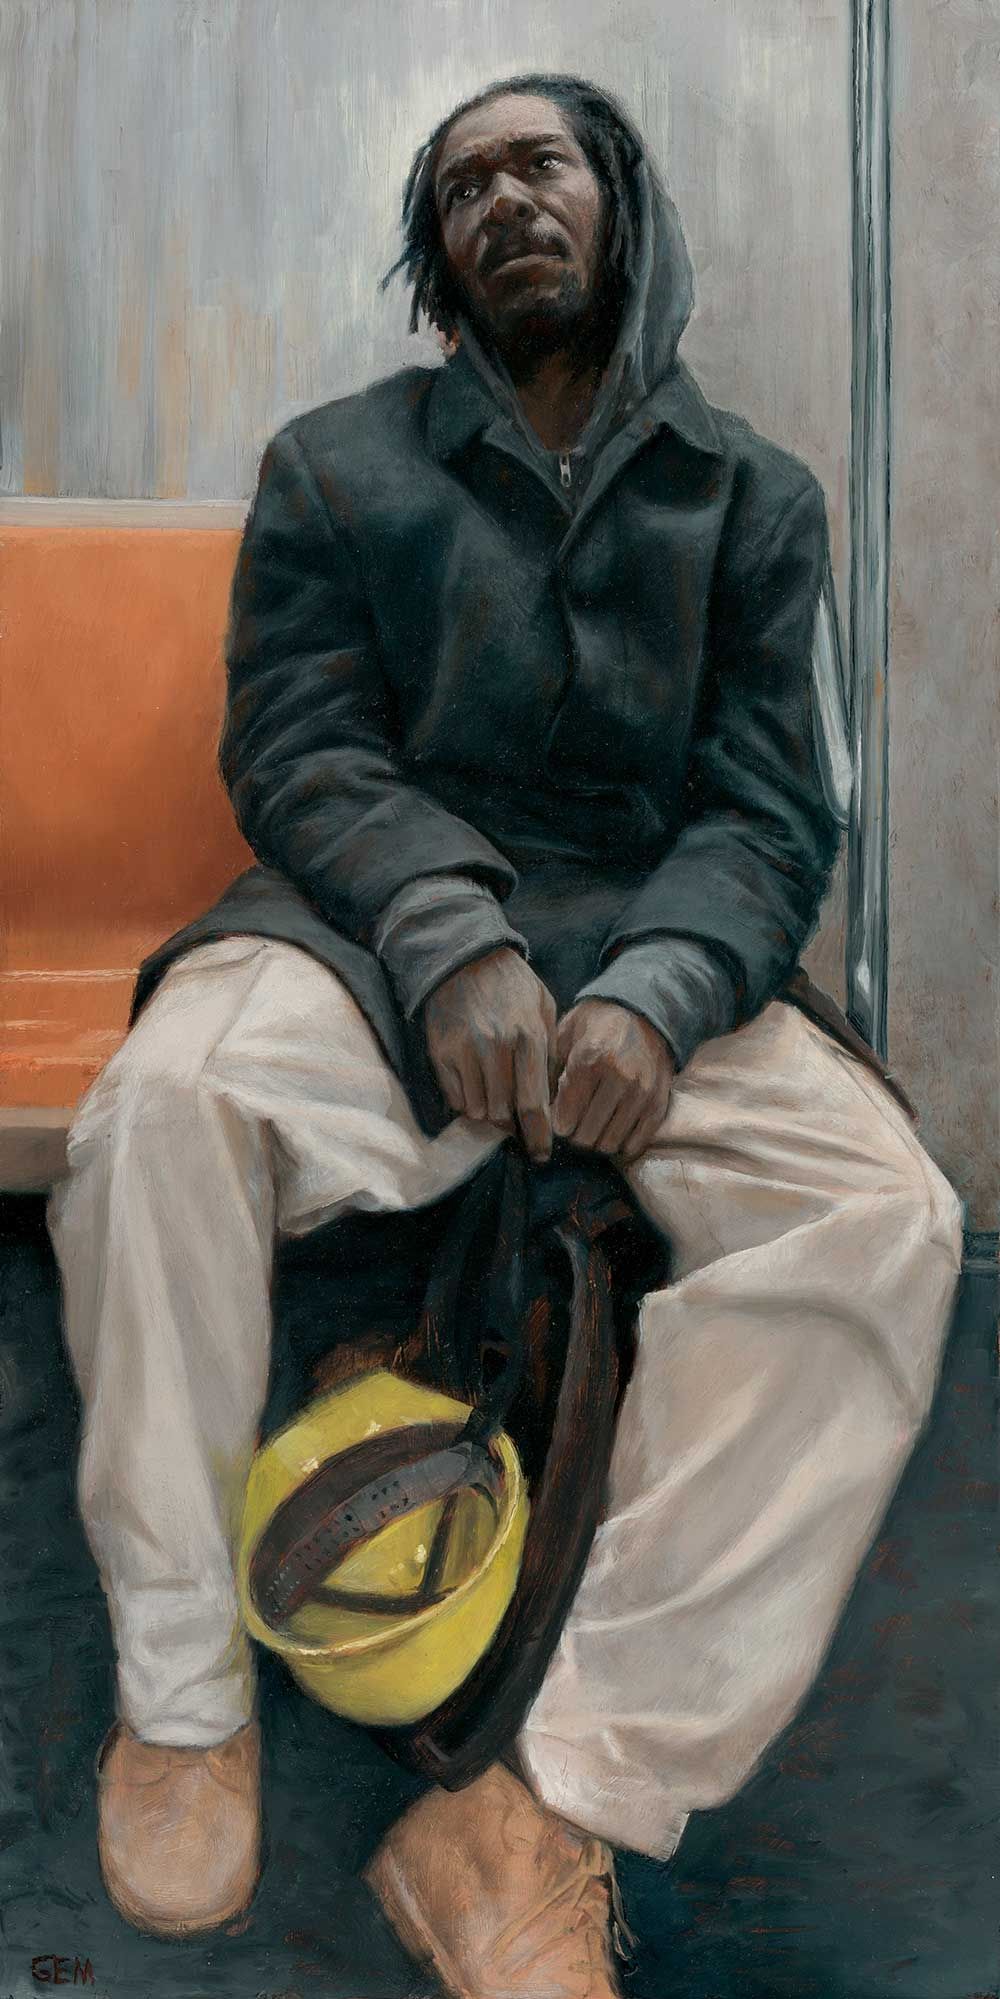 American Dreaming, 24 x 12 inches, oil on ACM panel